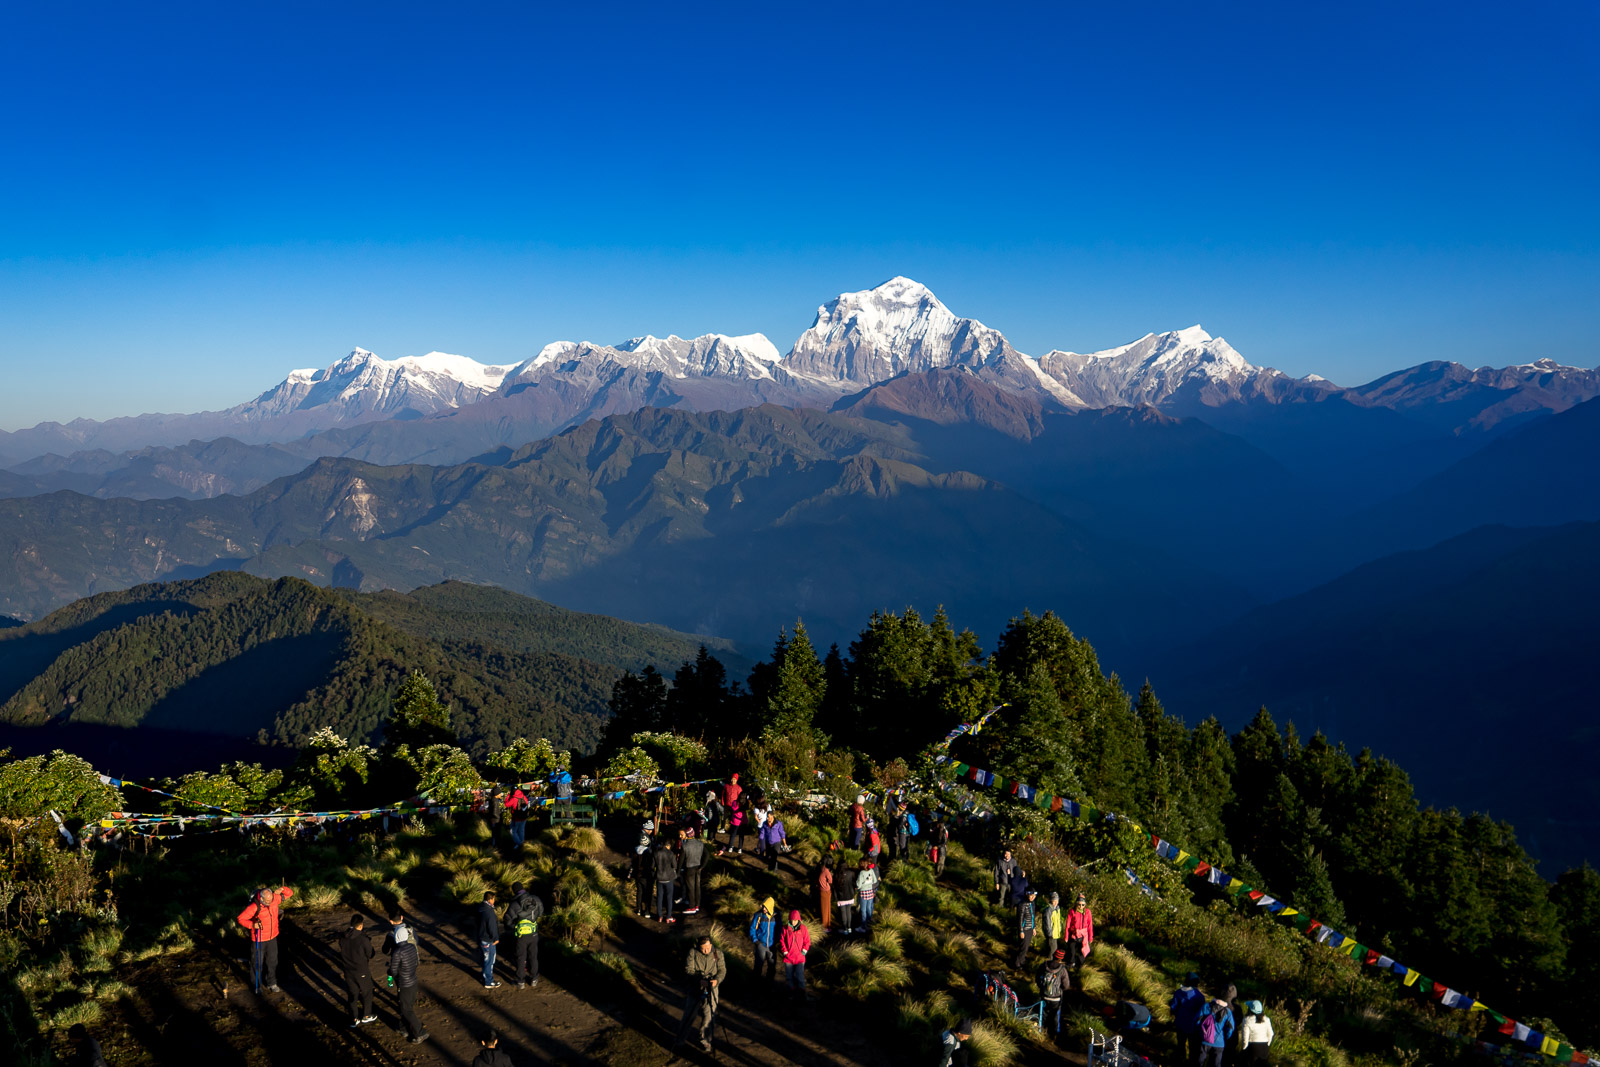 Poon hill hike and trek to Tadapani (2540m/8332ft), 6-7 hrs walk